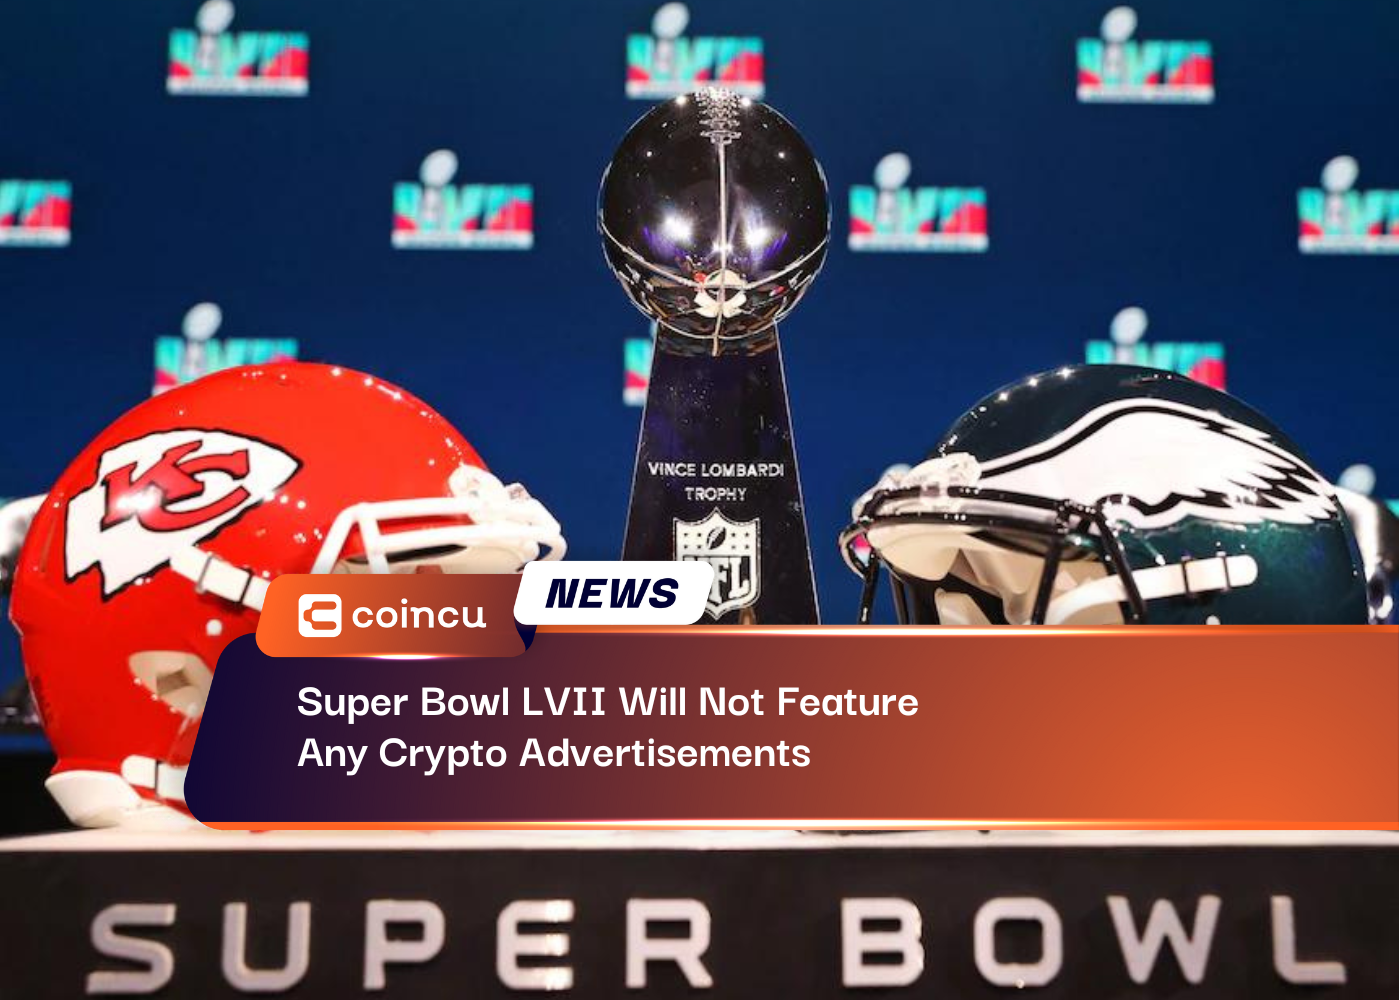 Super Bowl LVII Will Not Feature